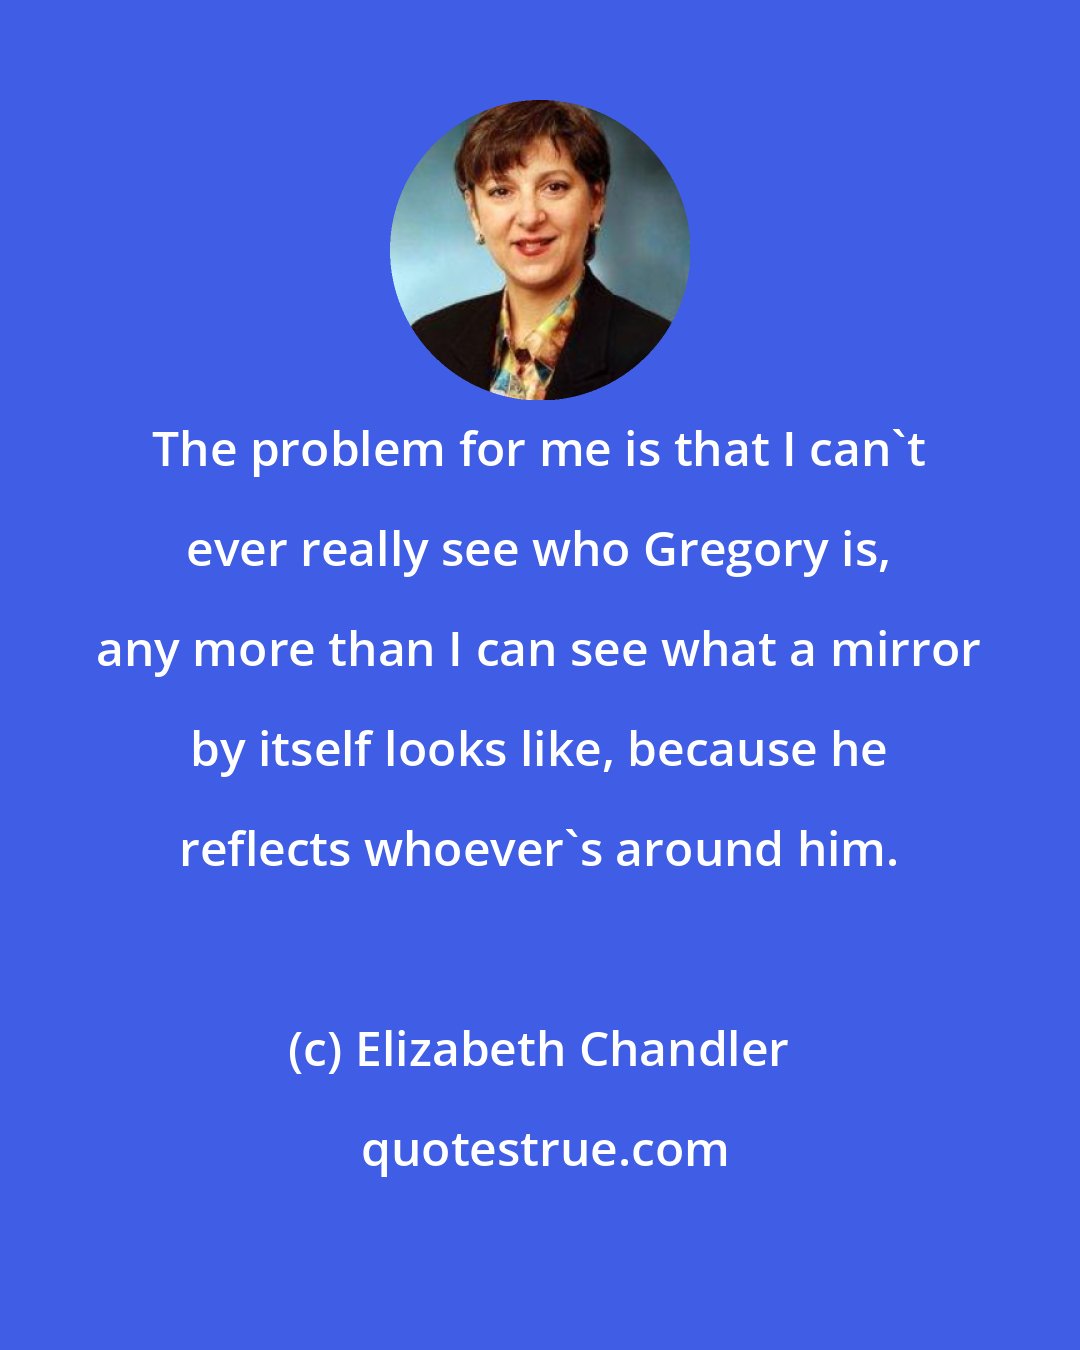 Elizabeth Chandler: The problem for me is that I can't ever really see who Gregory is, any more than I can see what a mirror by itself looks like, because he reflects whoever's around him.